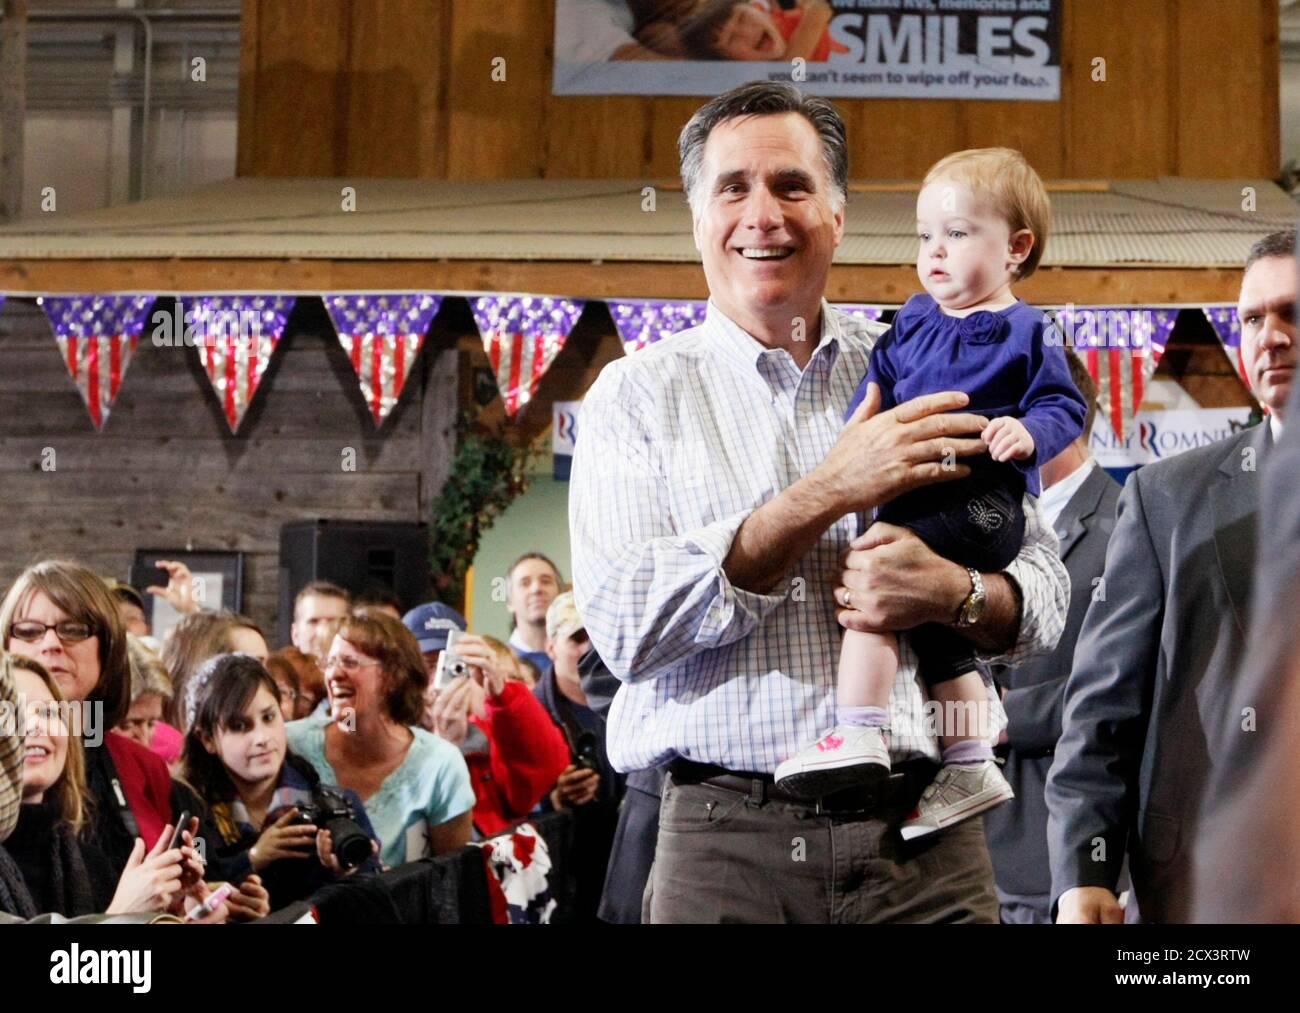 Republican presidential candidate Mitt Romney holds Madison Busch, 1, after he picked her up from her mother after a campaign event at an RV dealer in Loveland, Colorado February 7, 2012. The Colorado caucuses take place today. REUTERS/Rick Wilking (UNITED STATES - Tags: POLITICS) Stock Photo